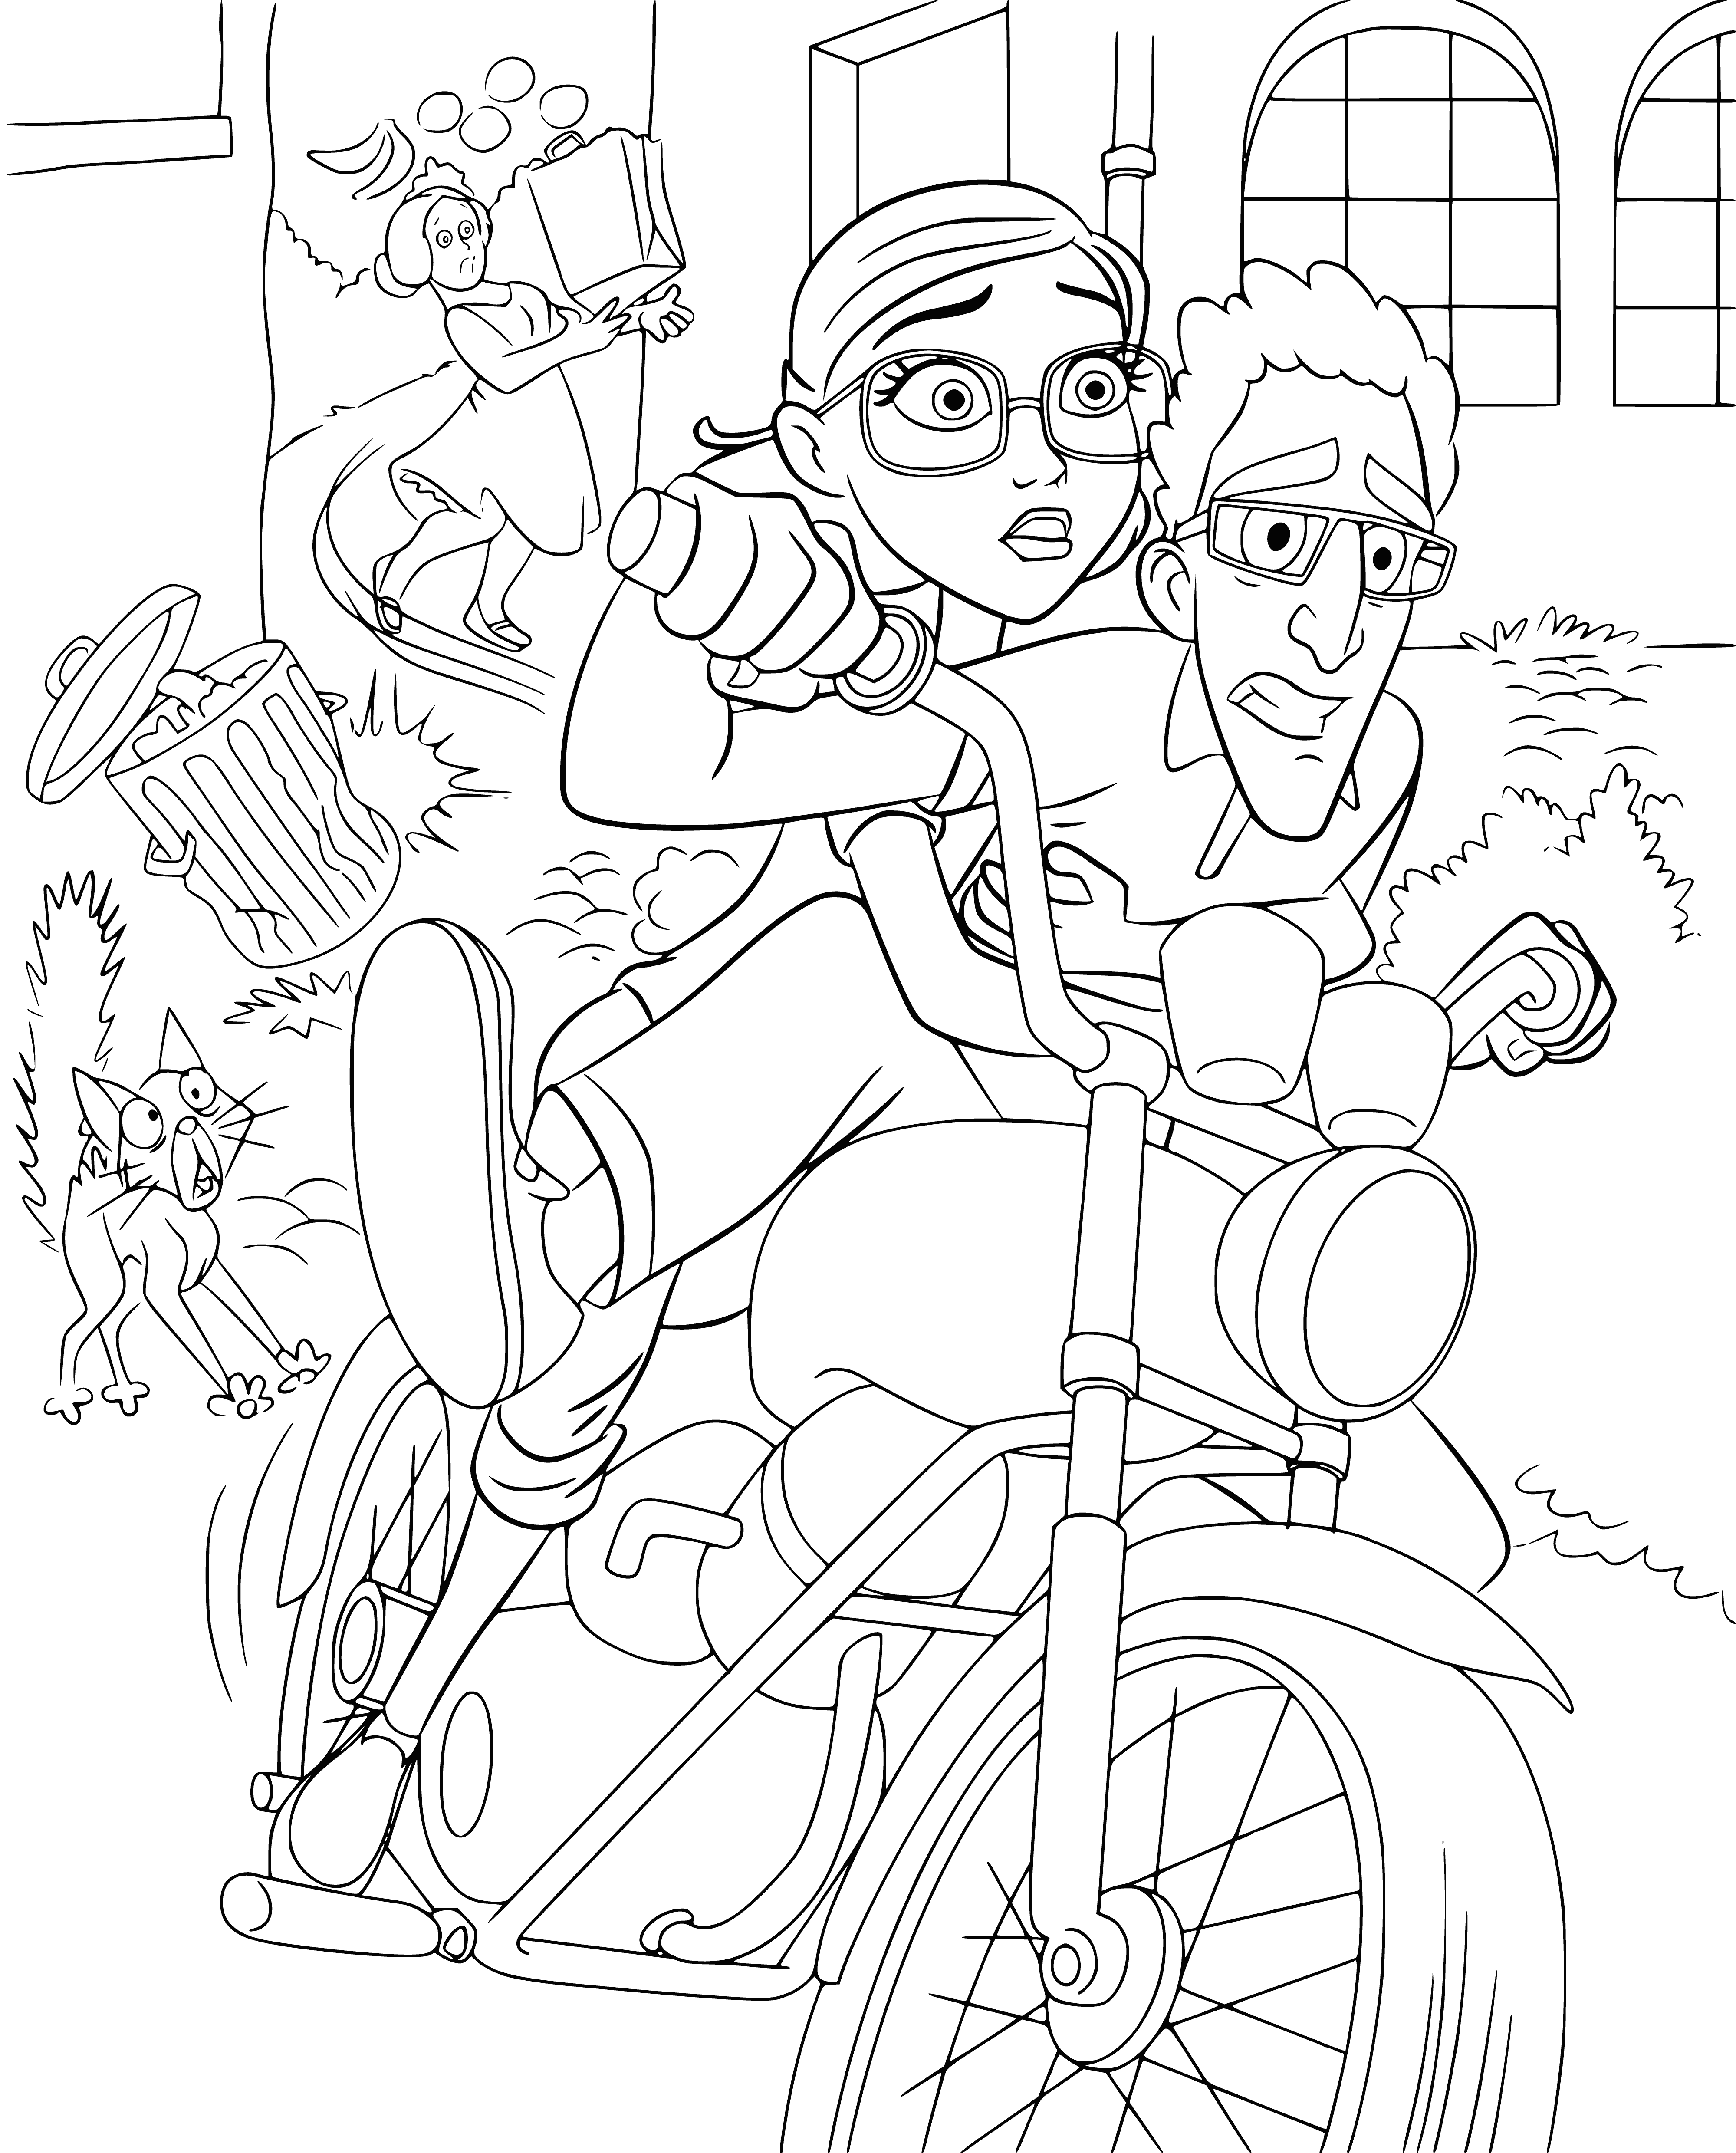 Crazy speed coloring page